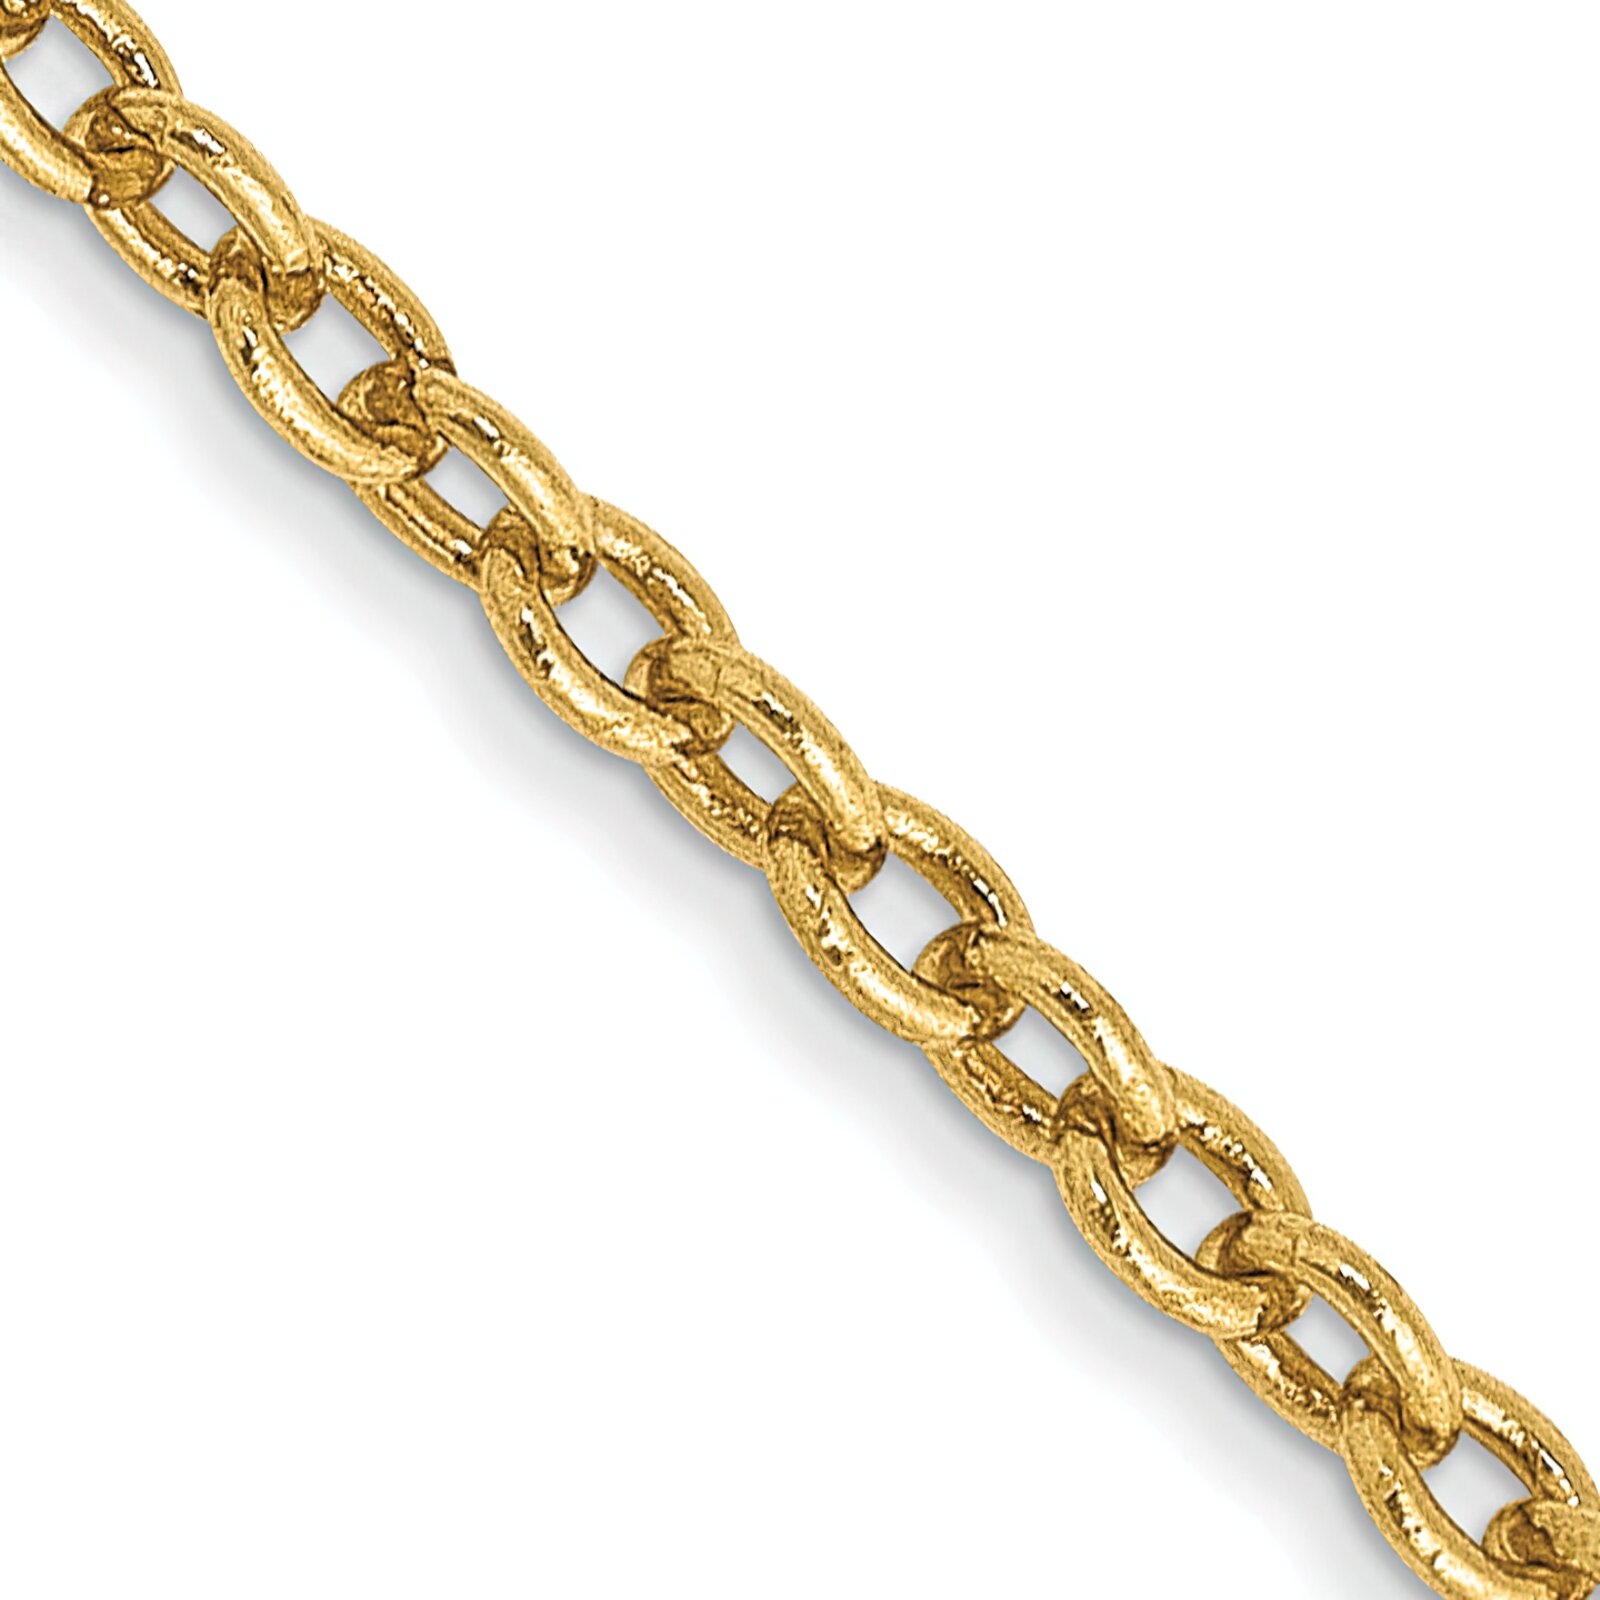 Findingking 14K Yellow Gold 2mm Cable Chain Necklace Jewelry 18"